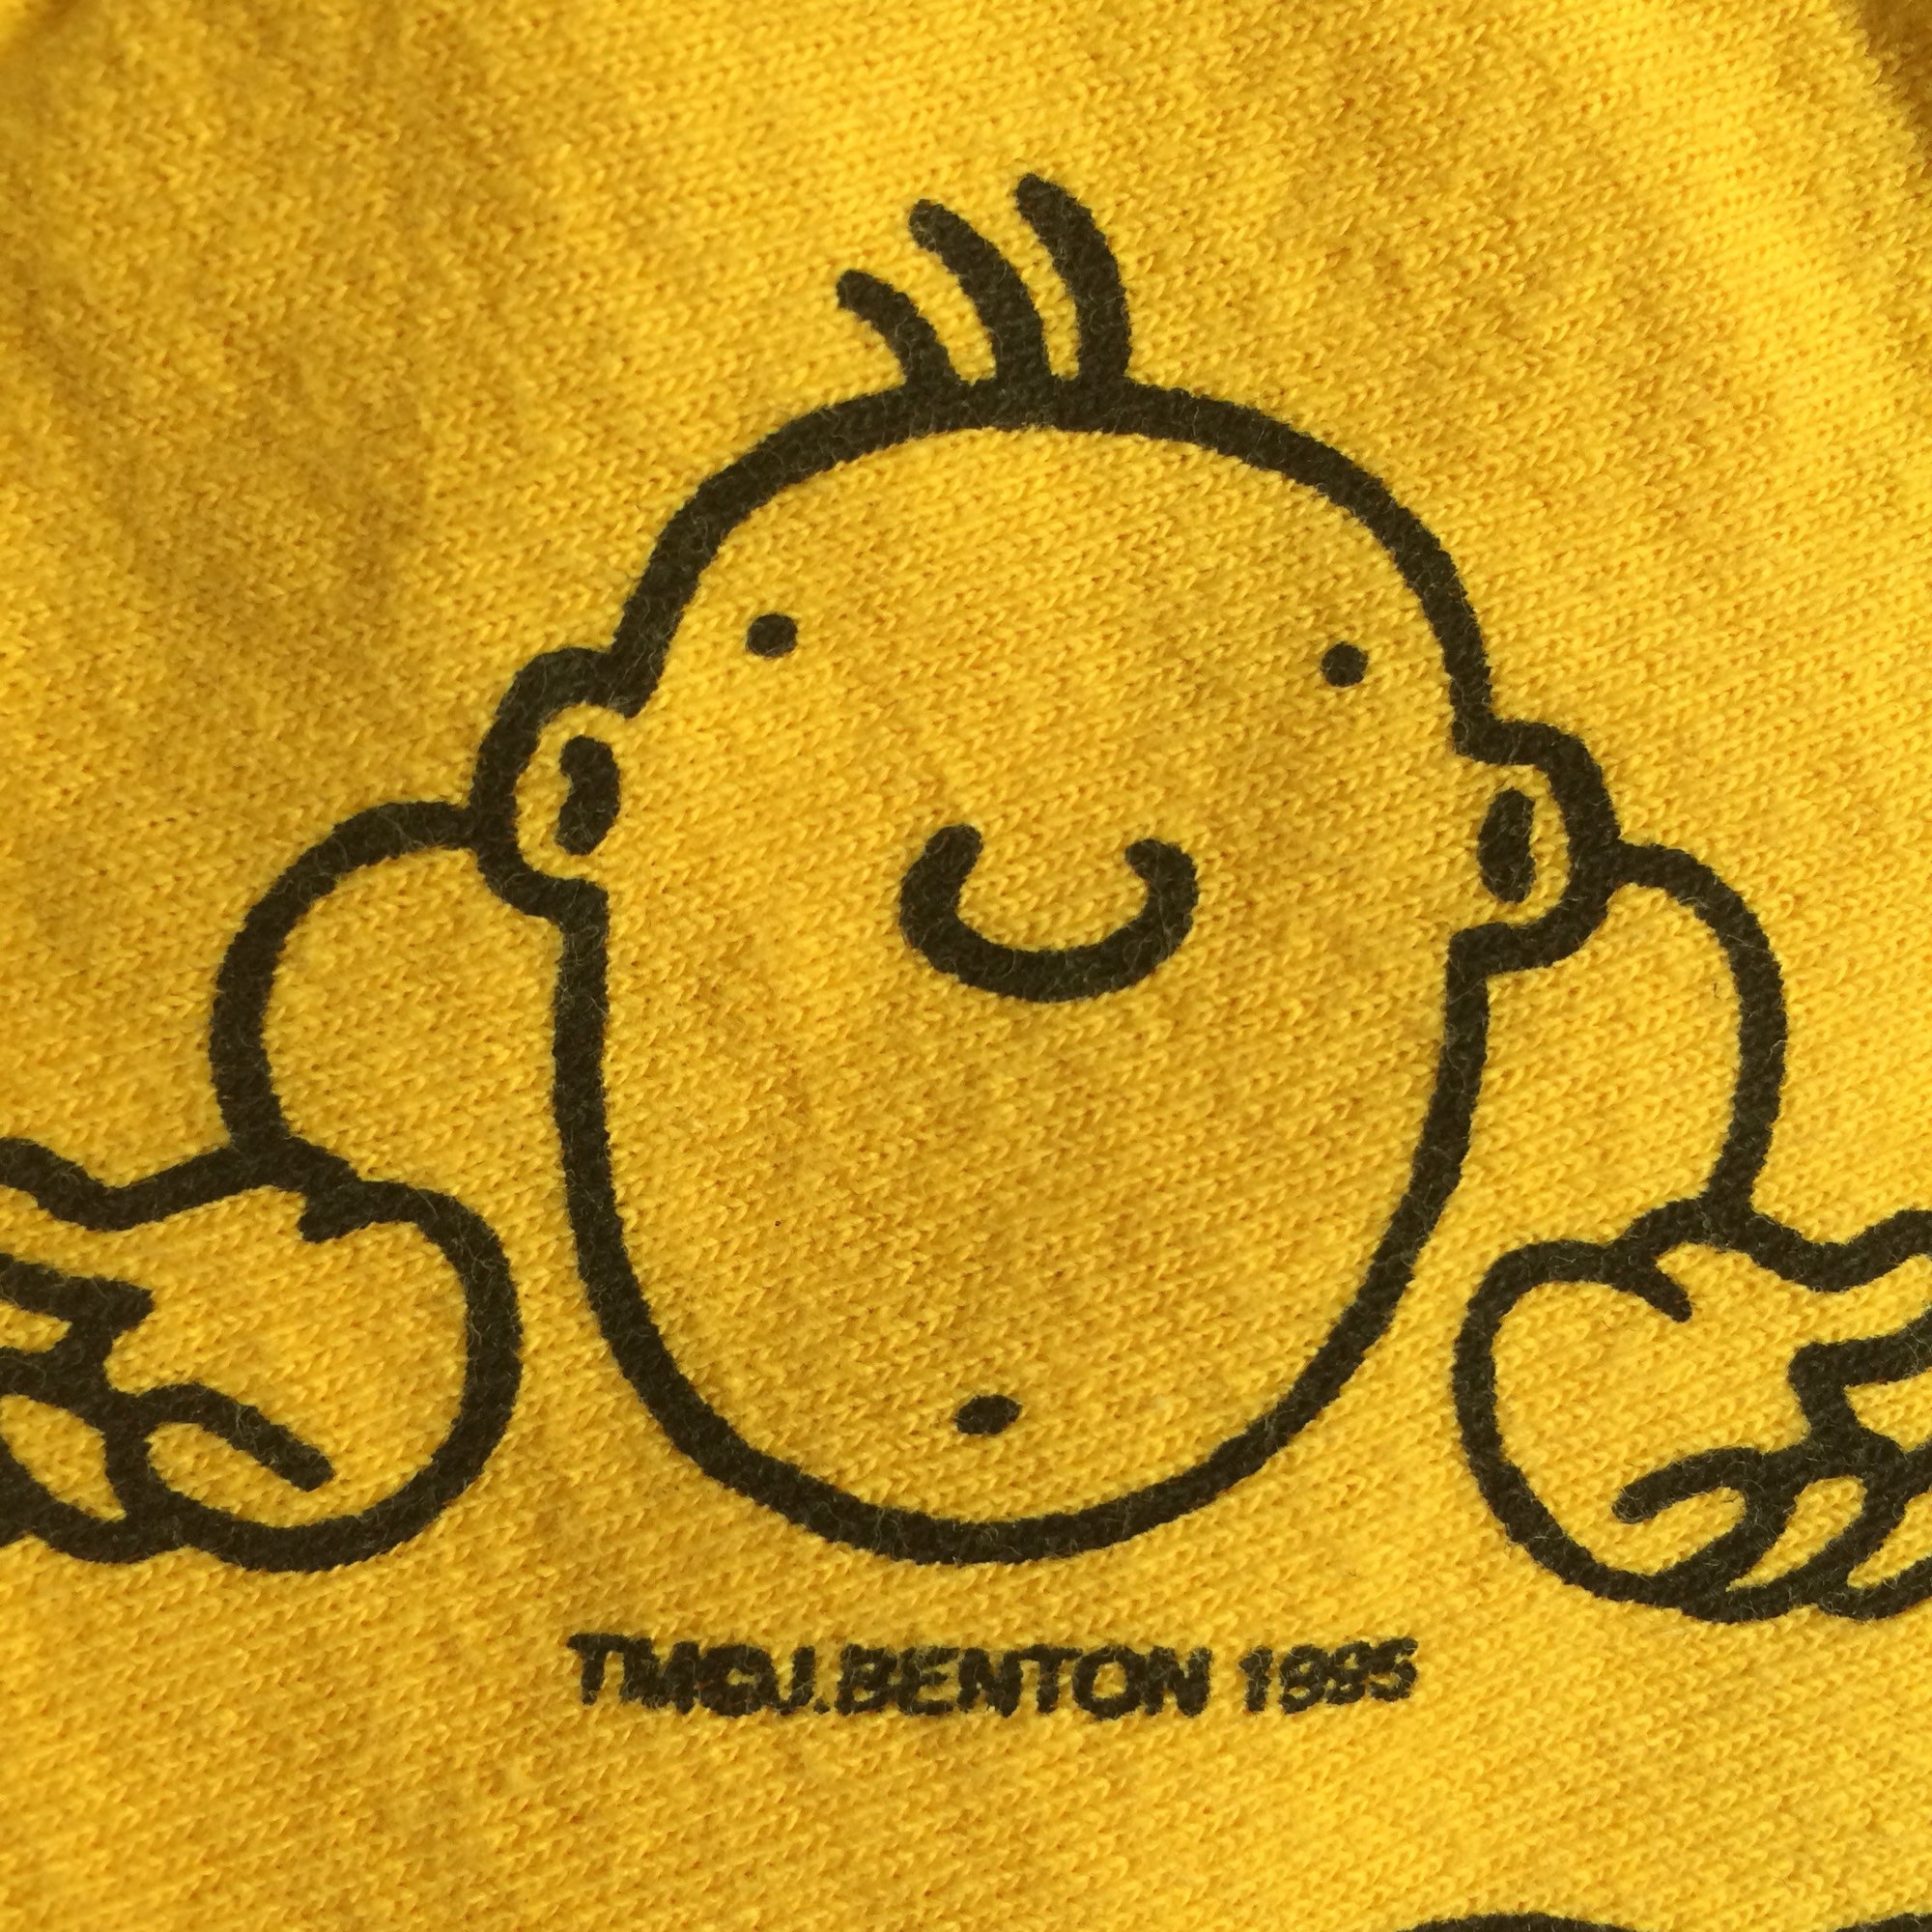 Vintage 90s Smiley Face T-Shirt